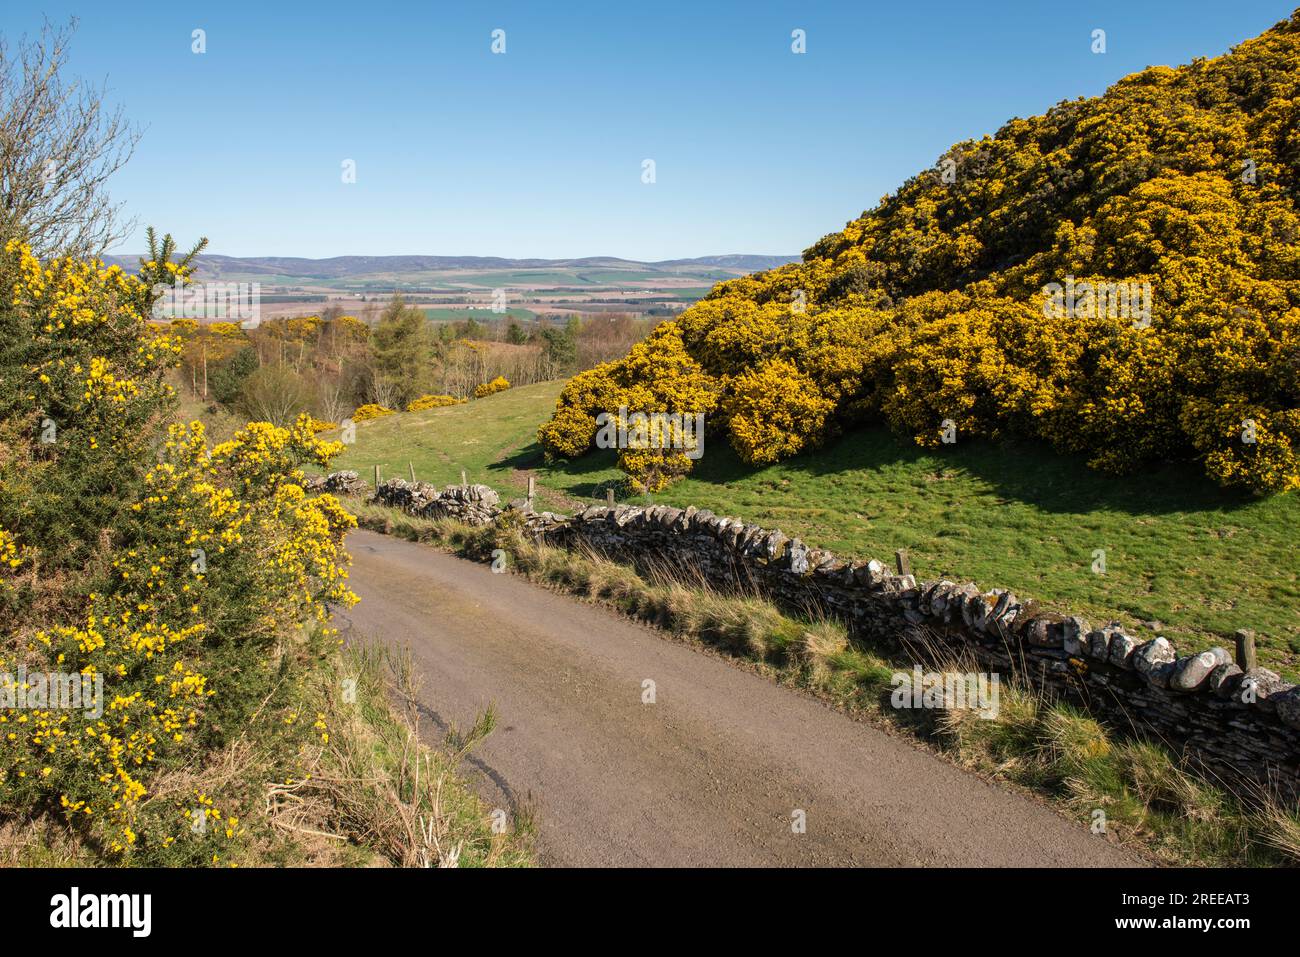 Views over to the Angus Glens from the single track road fringed with yellow broom passing over Finavon Hill, Angus, Scotland. Stock Photo